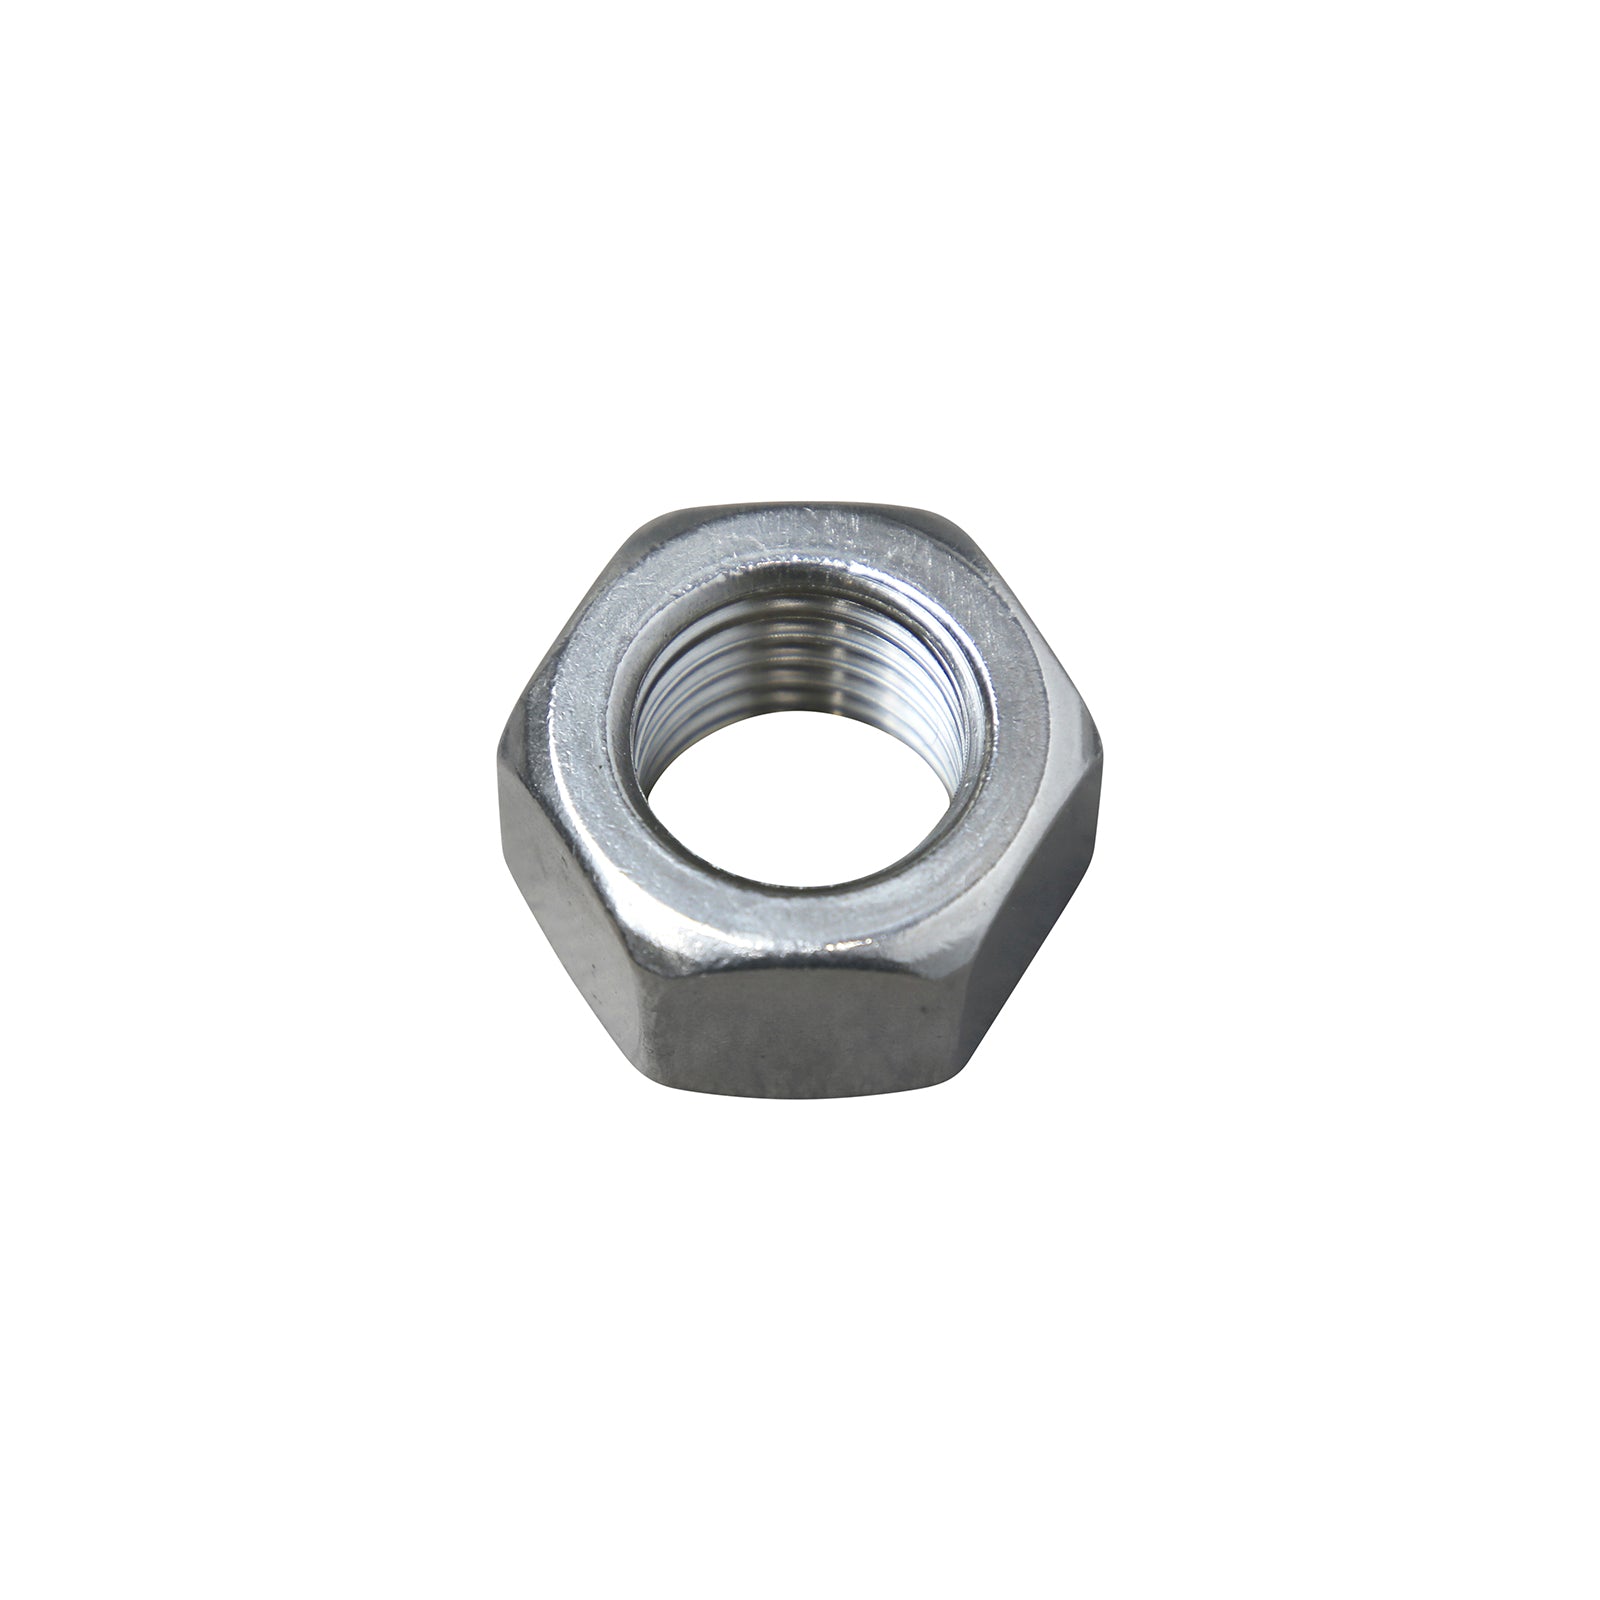 1"-8 Conquest Hex Nut - 316 Stainless Steel